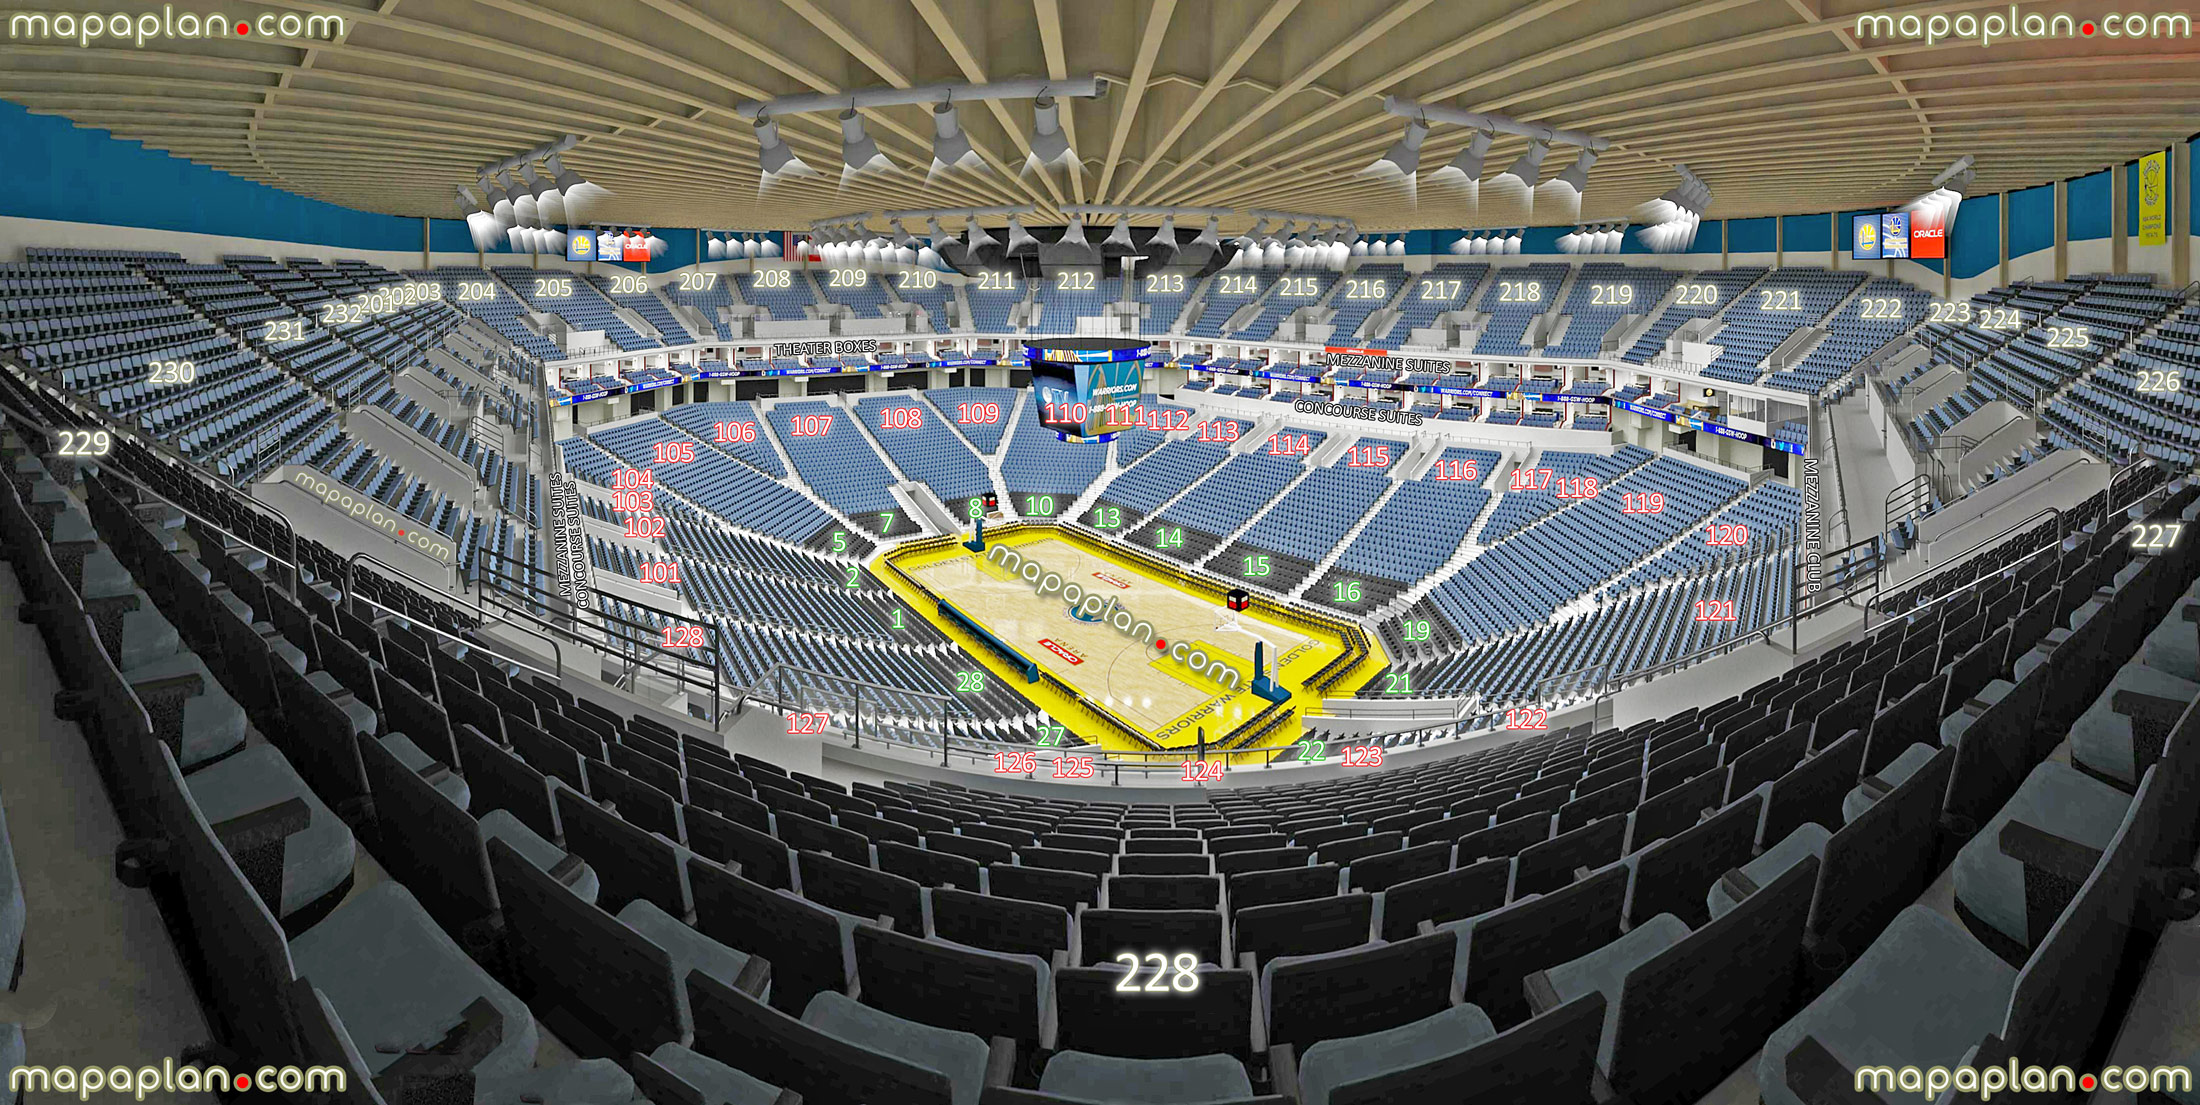 view section 228 row 17 seat 16 golden state warriors nba ncaa college basketball tournament game panorama 100 lower 200 upper level courtside vip sideline club baseline corner Oakland Oracle Arena seating chart